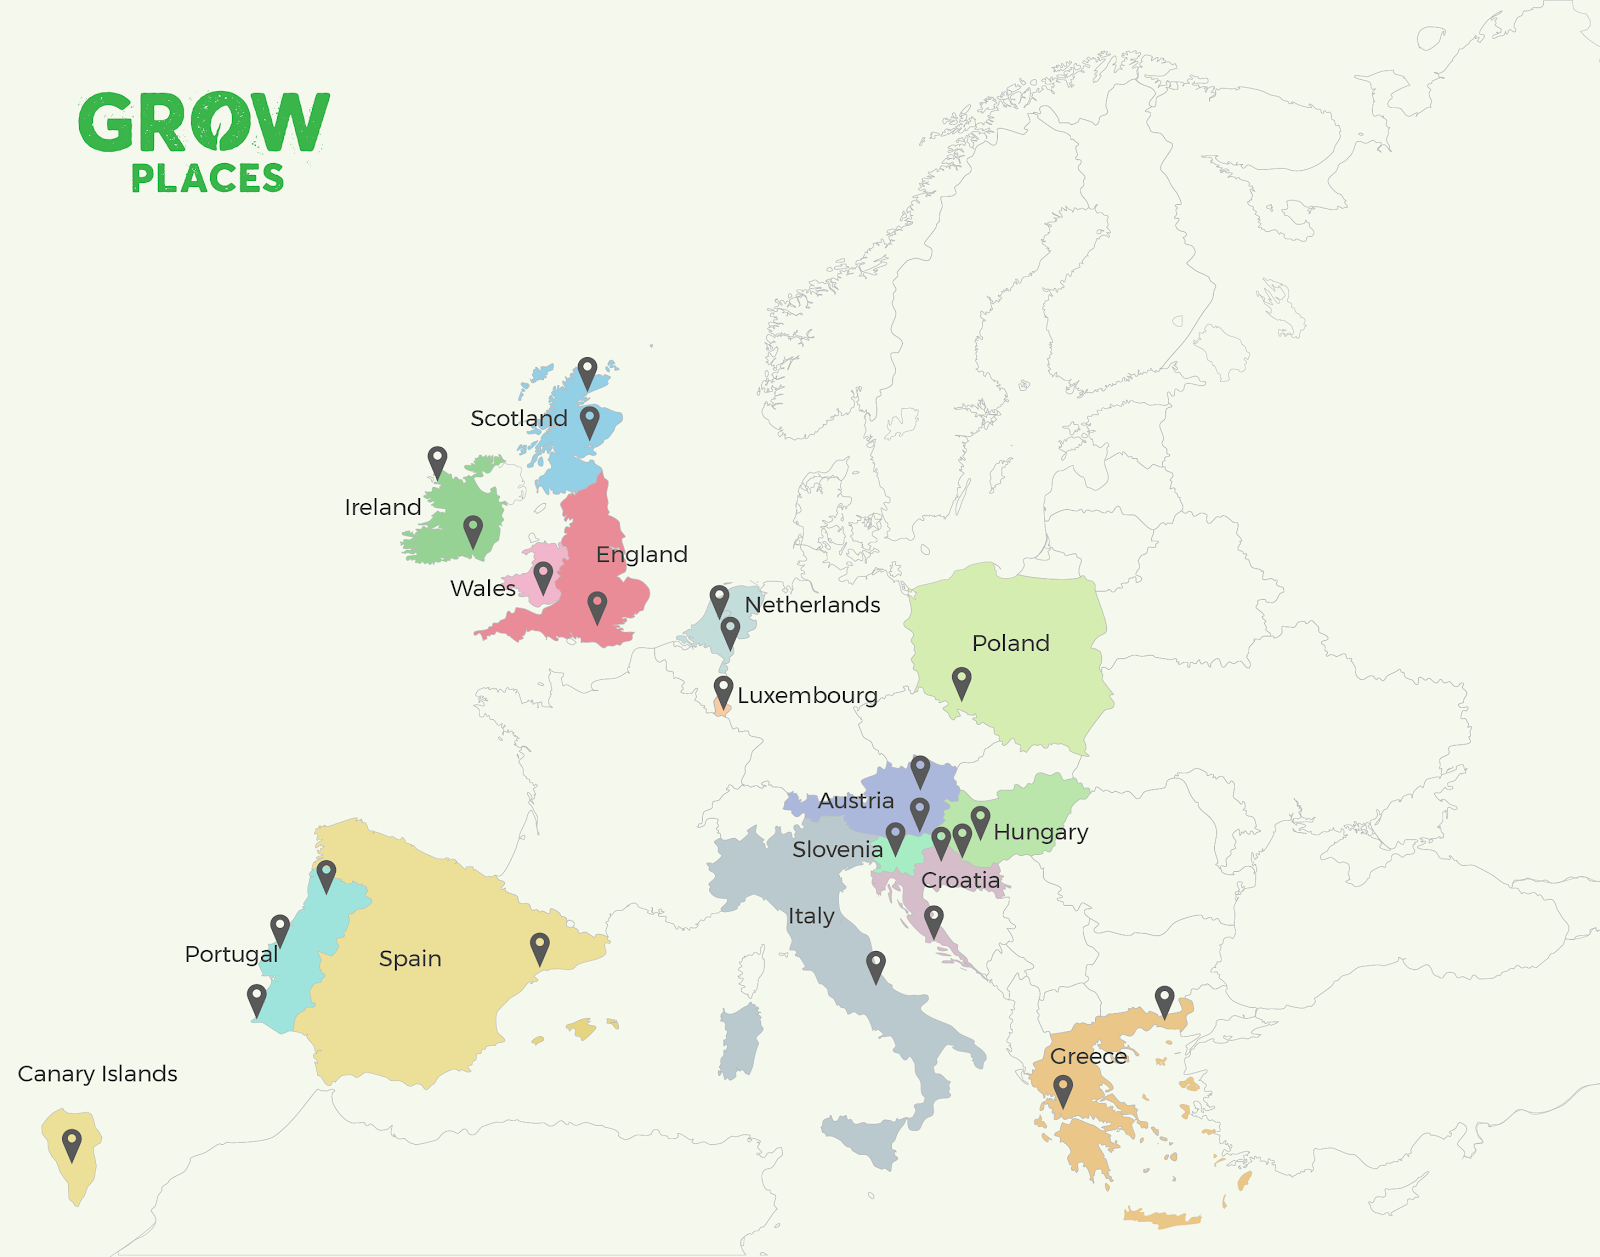 Map of Europe showing location of GROW Places